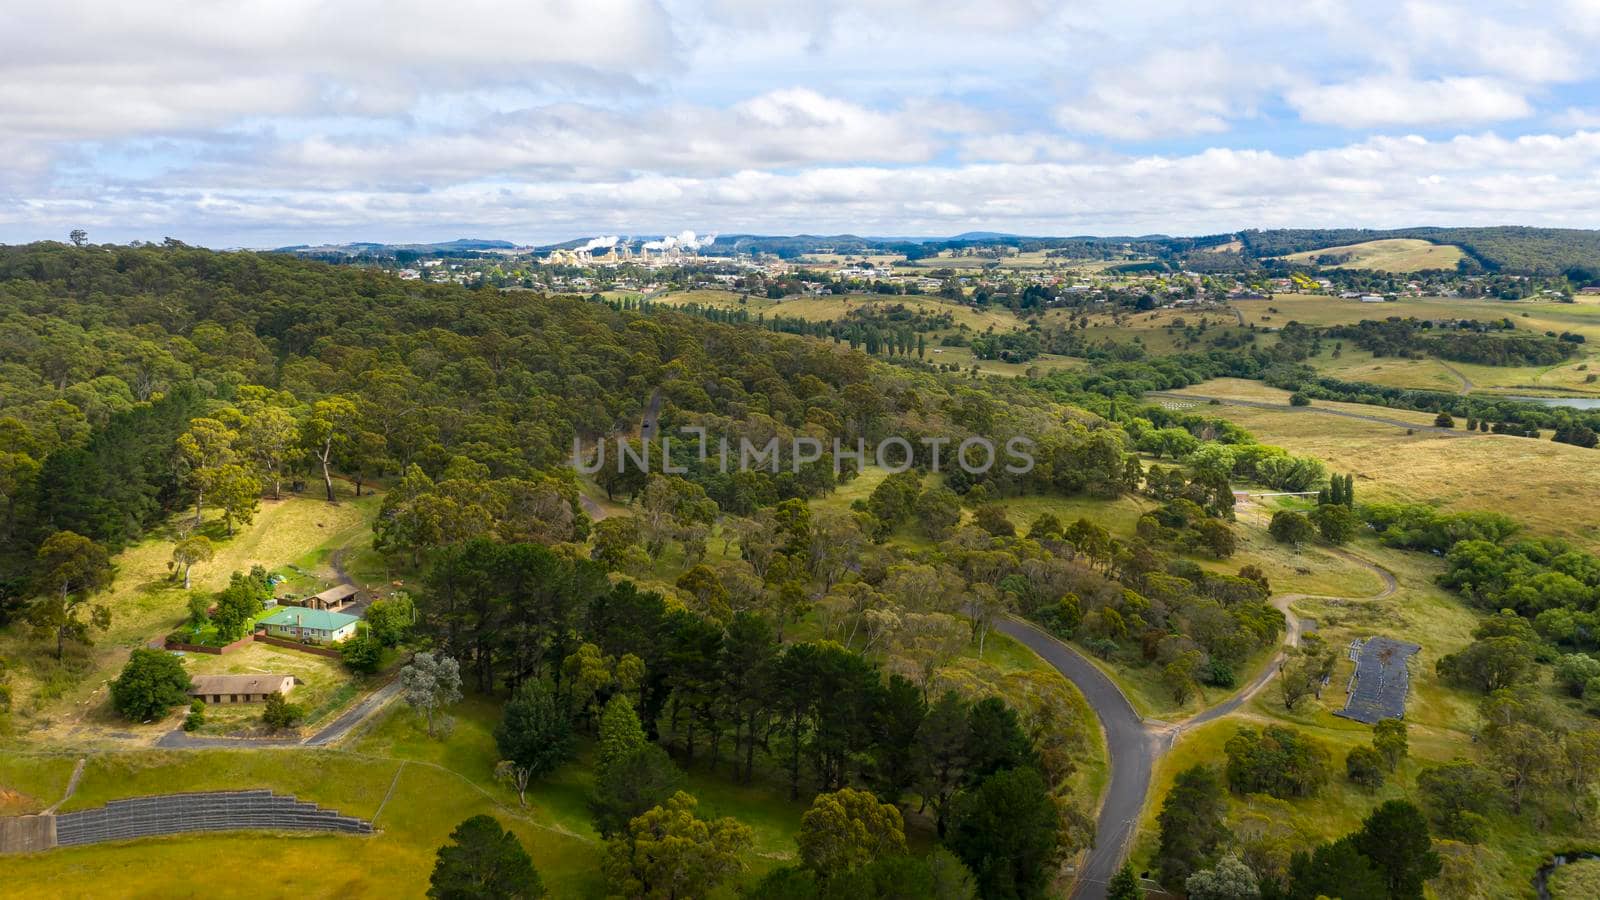 Aerial view of the township of Oberon in regional Australia by WittkePhotos